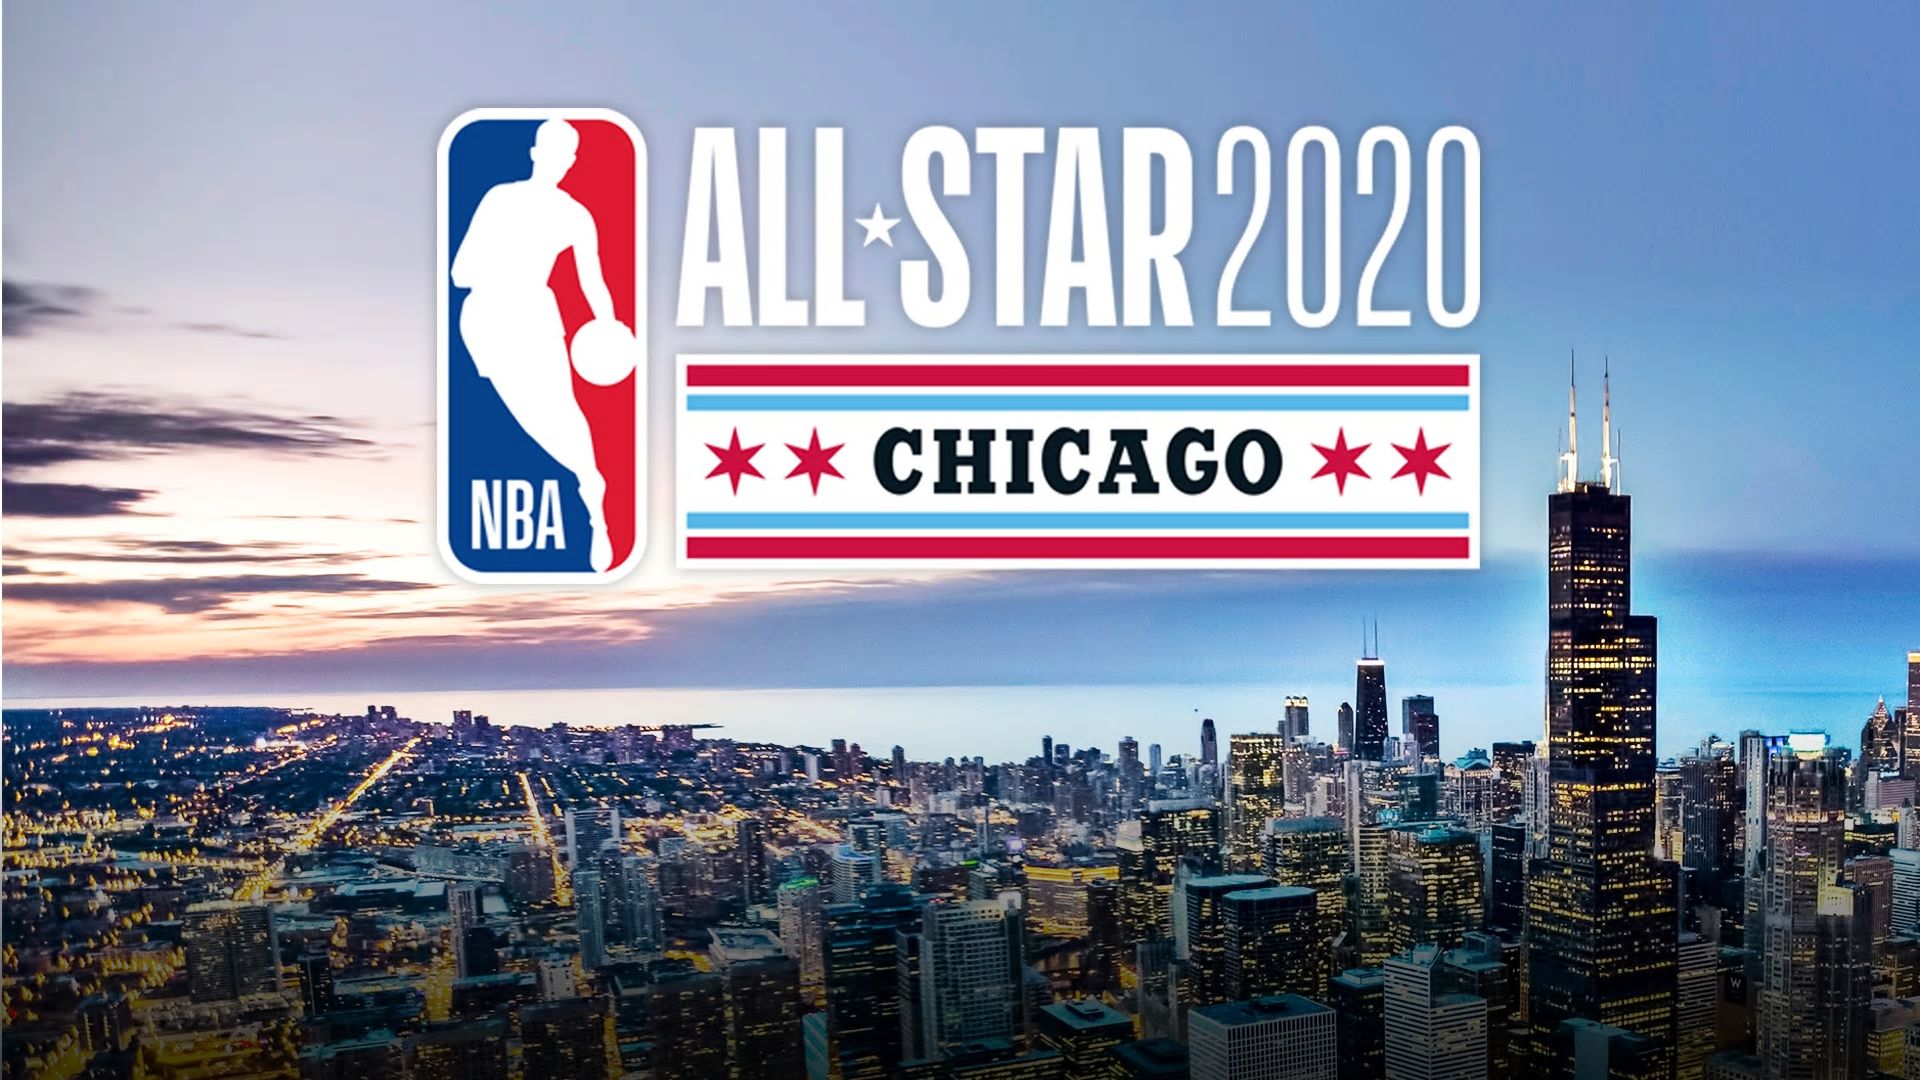 Fourth Quarter Of The 2020 Nba All Star Game Will Be Commercial Free To Honor Kobe Bryant Talkbasket Net